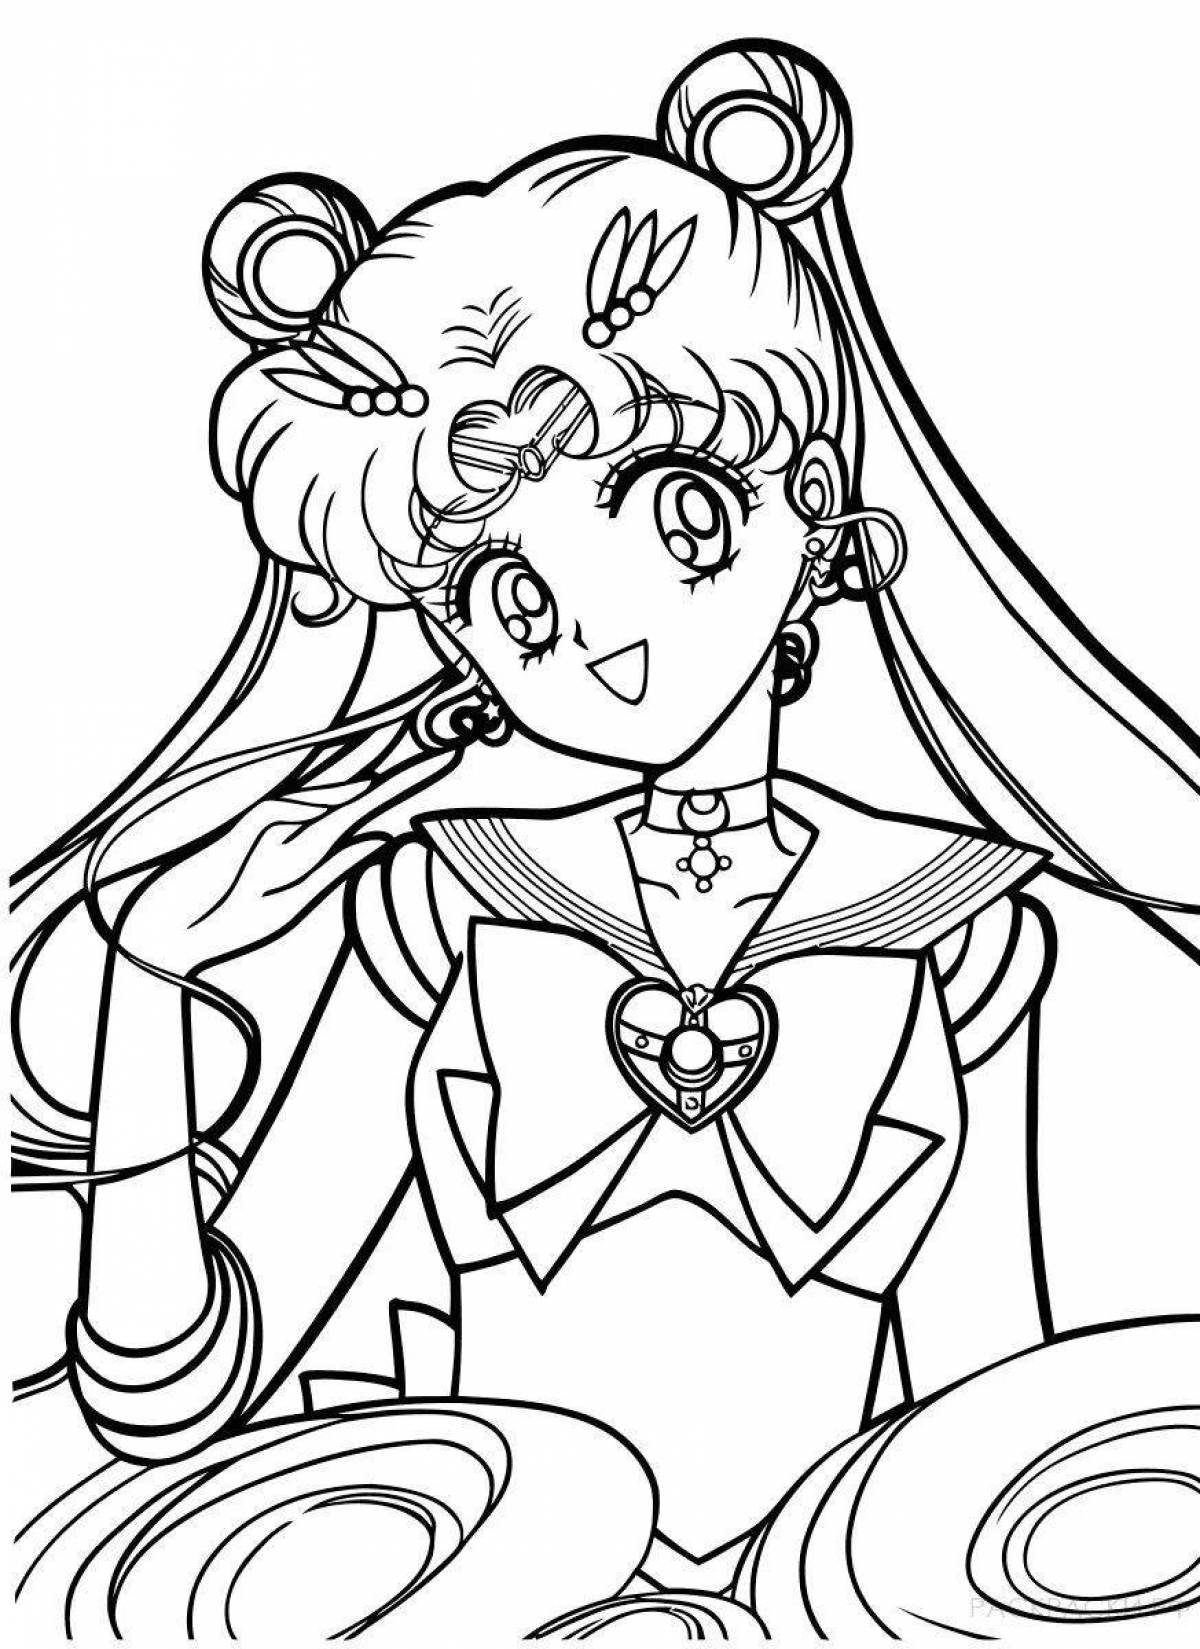 Exotic coloring book for girls sailor moon